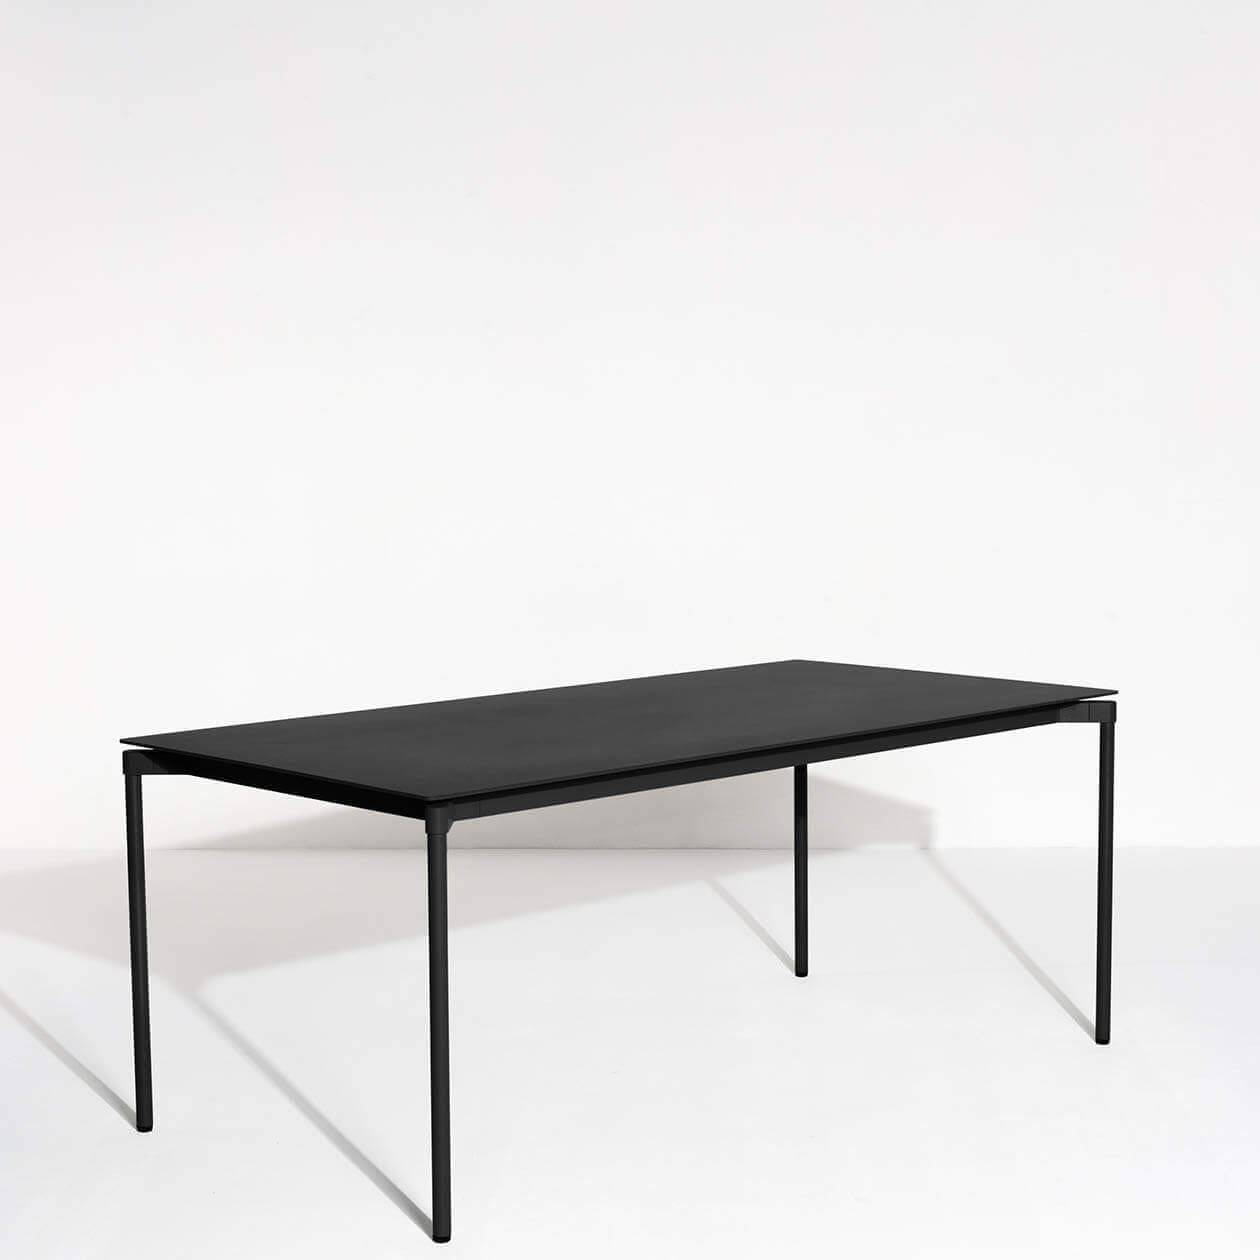 Fromme Rectangular Table - Black